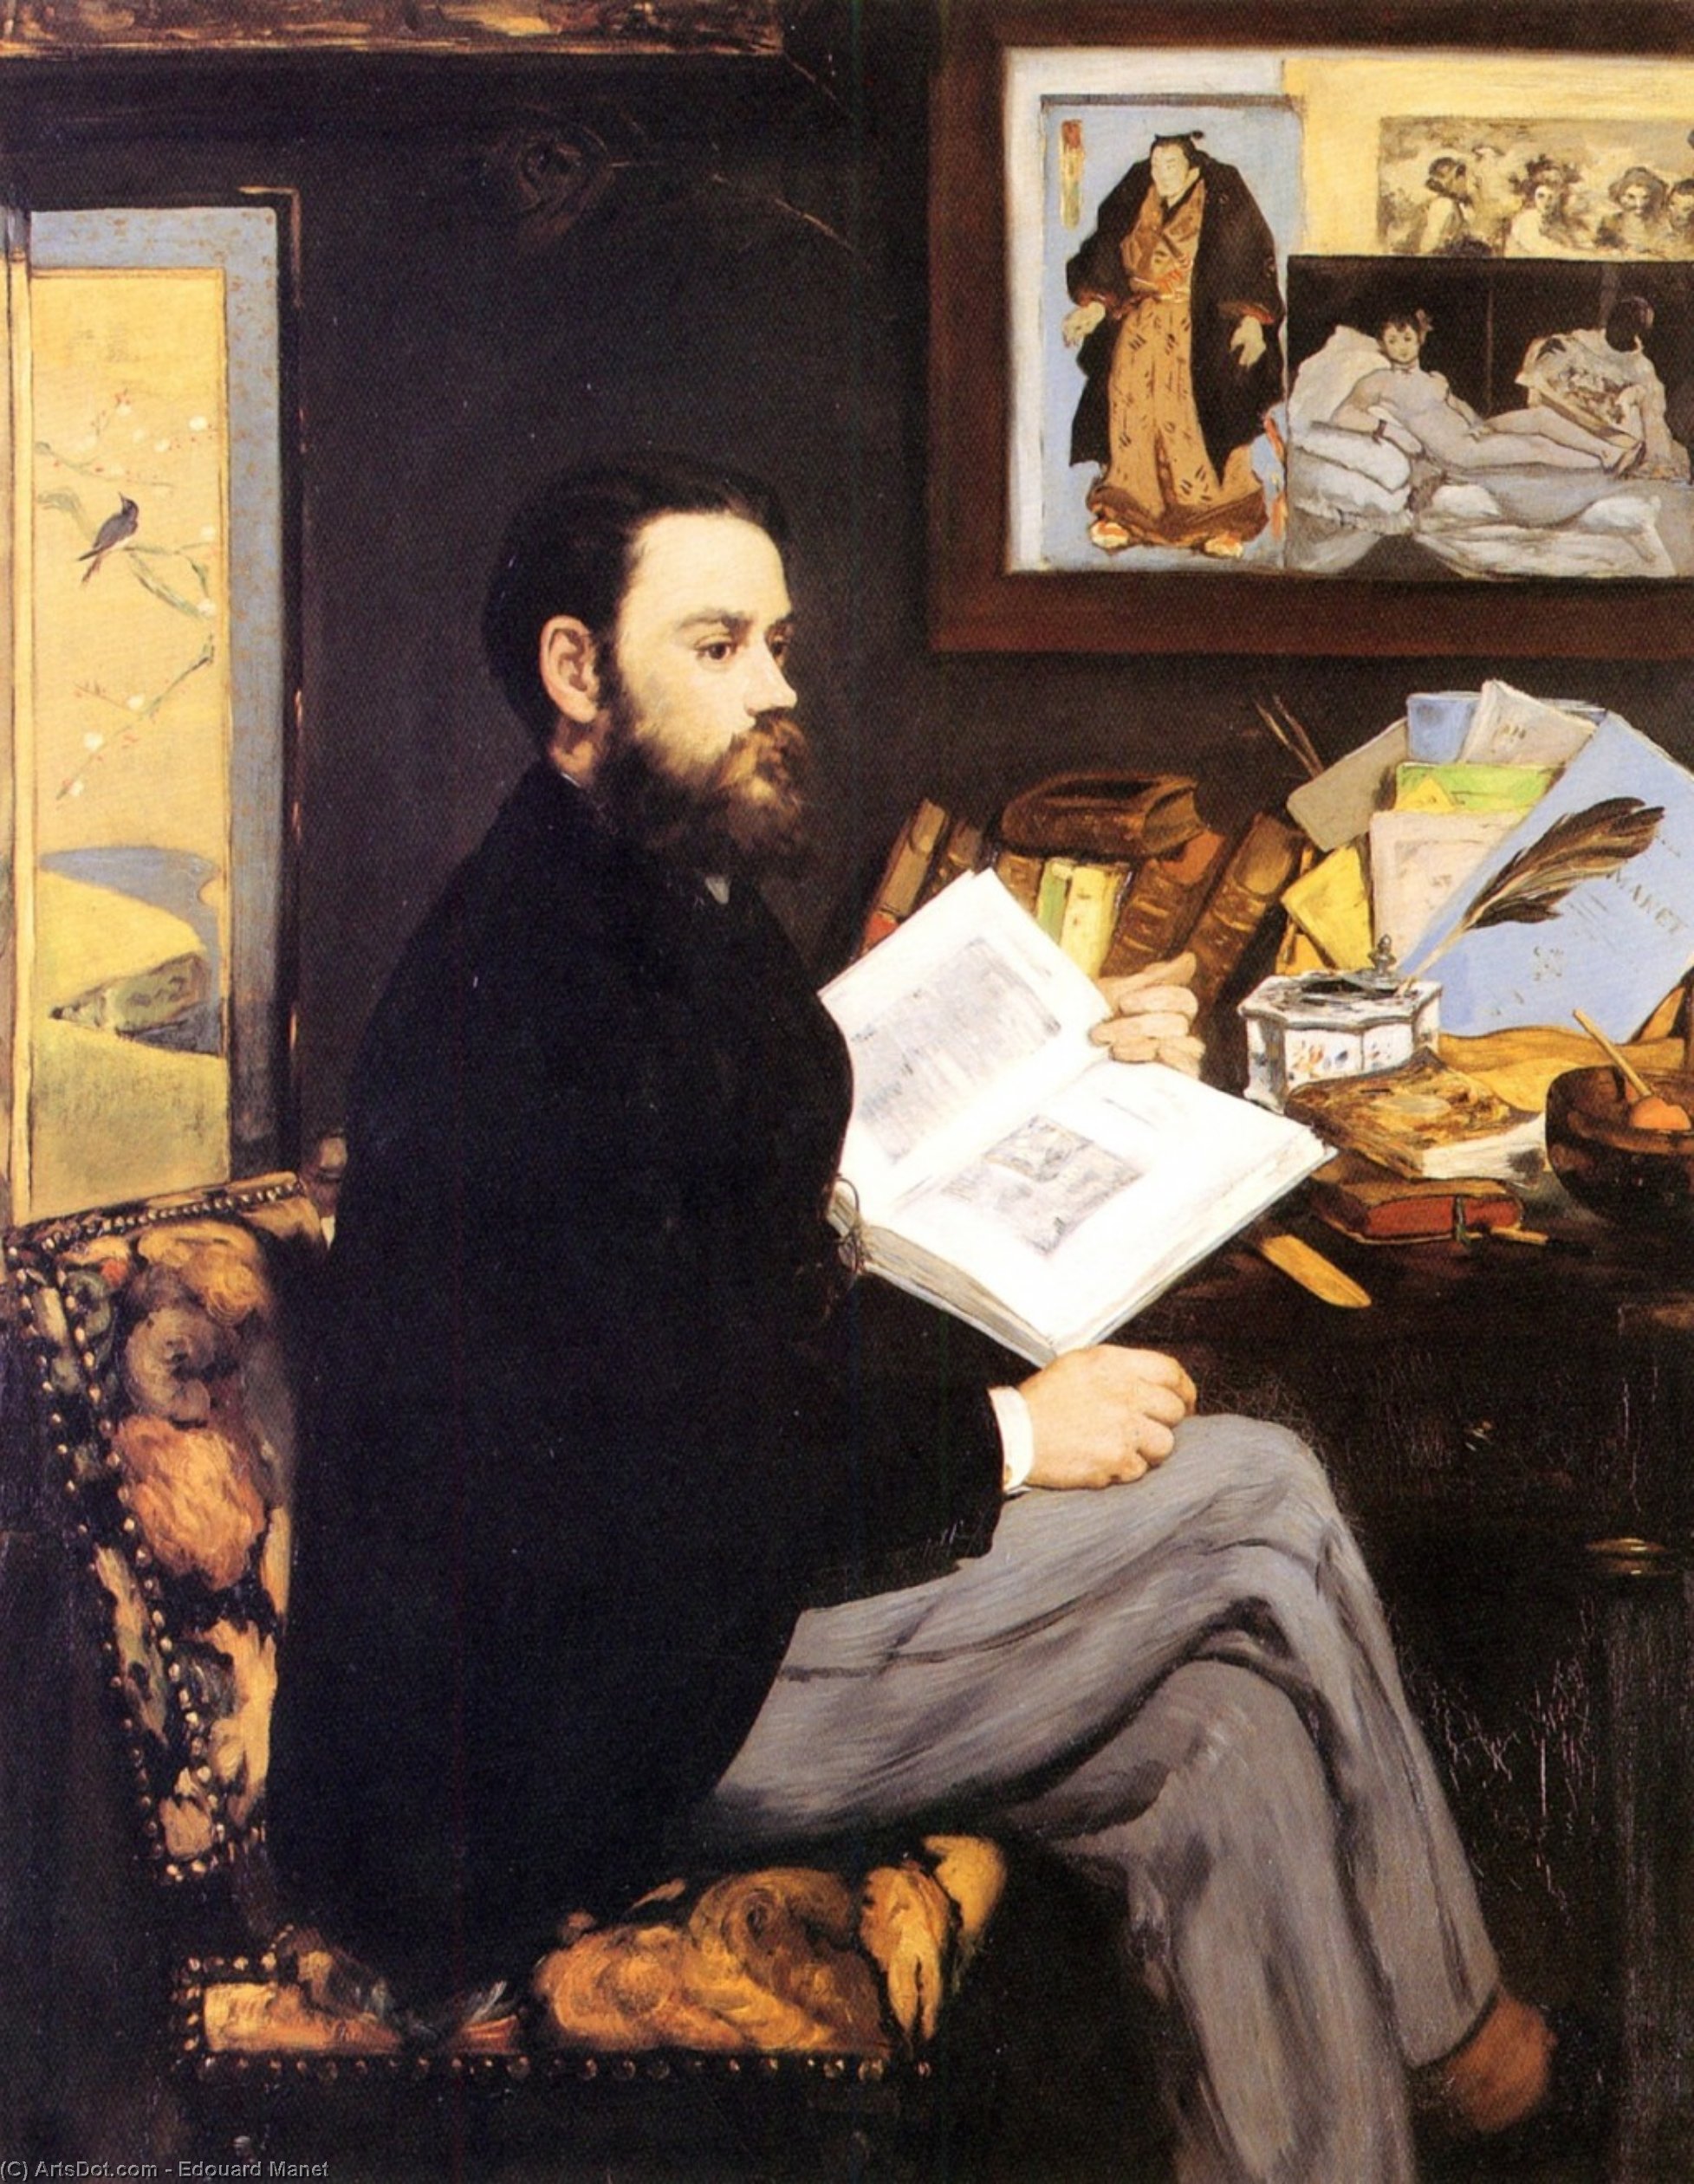 WikiOO.org - 백과 사전 - 회화, 삽화 Edouard Manet - Portrait d'Emile Zola, Musee d'Orsay